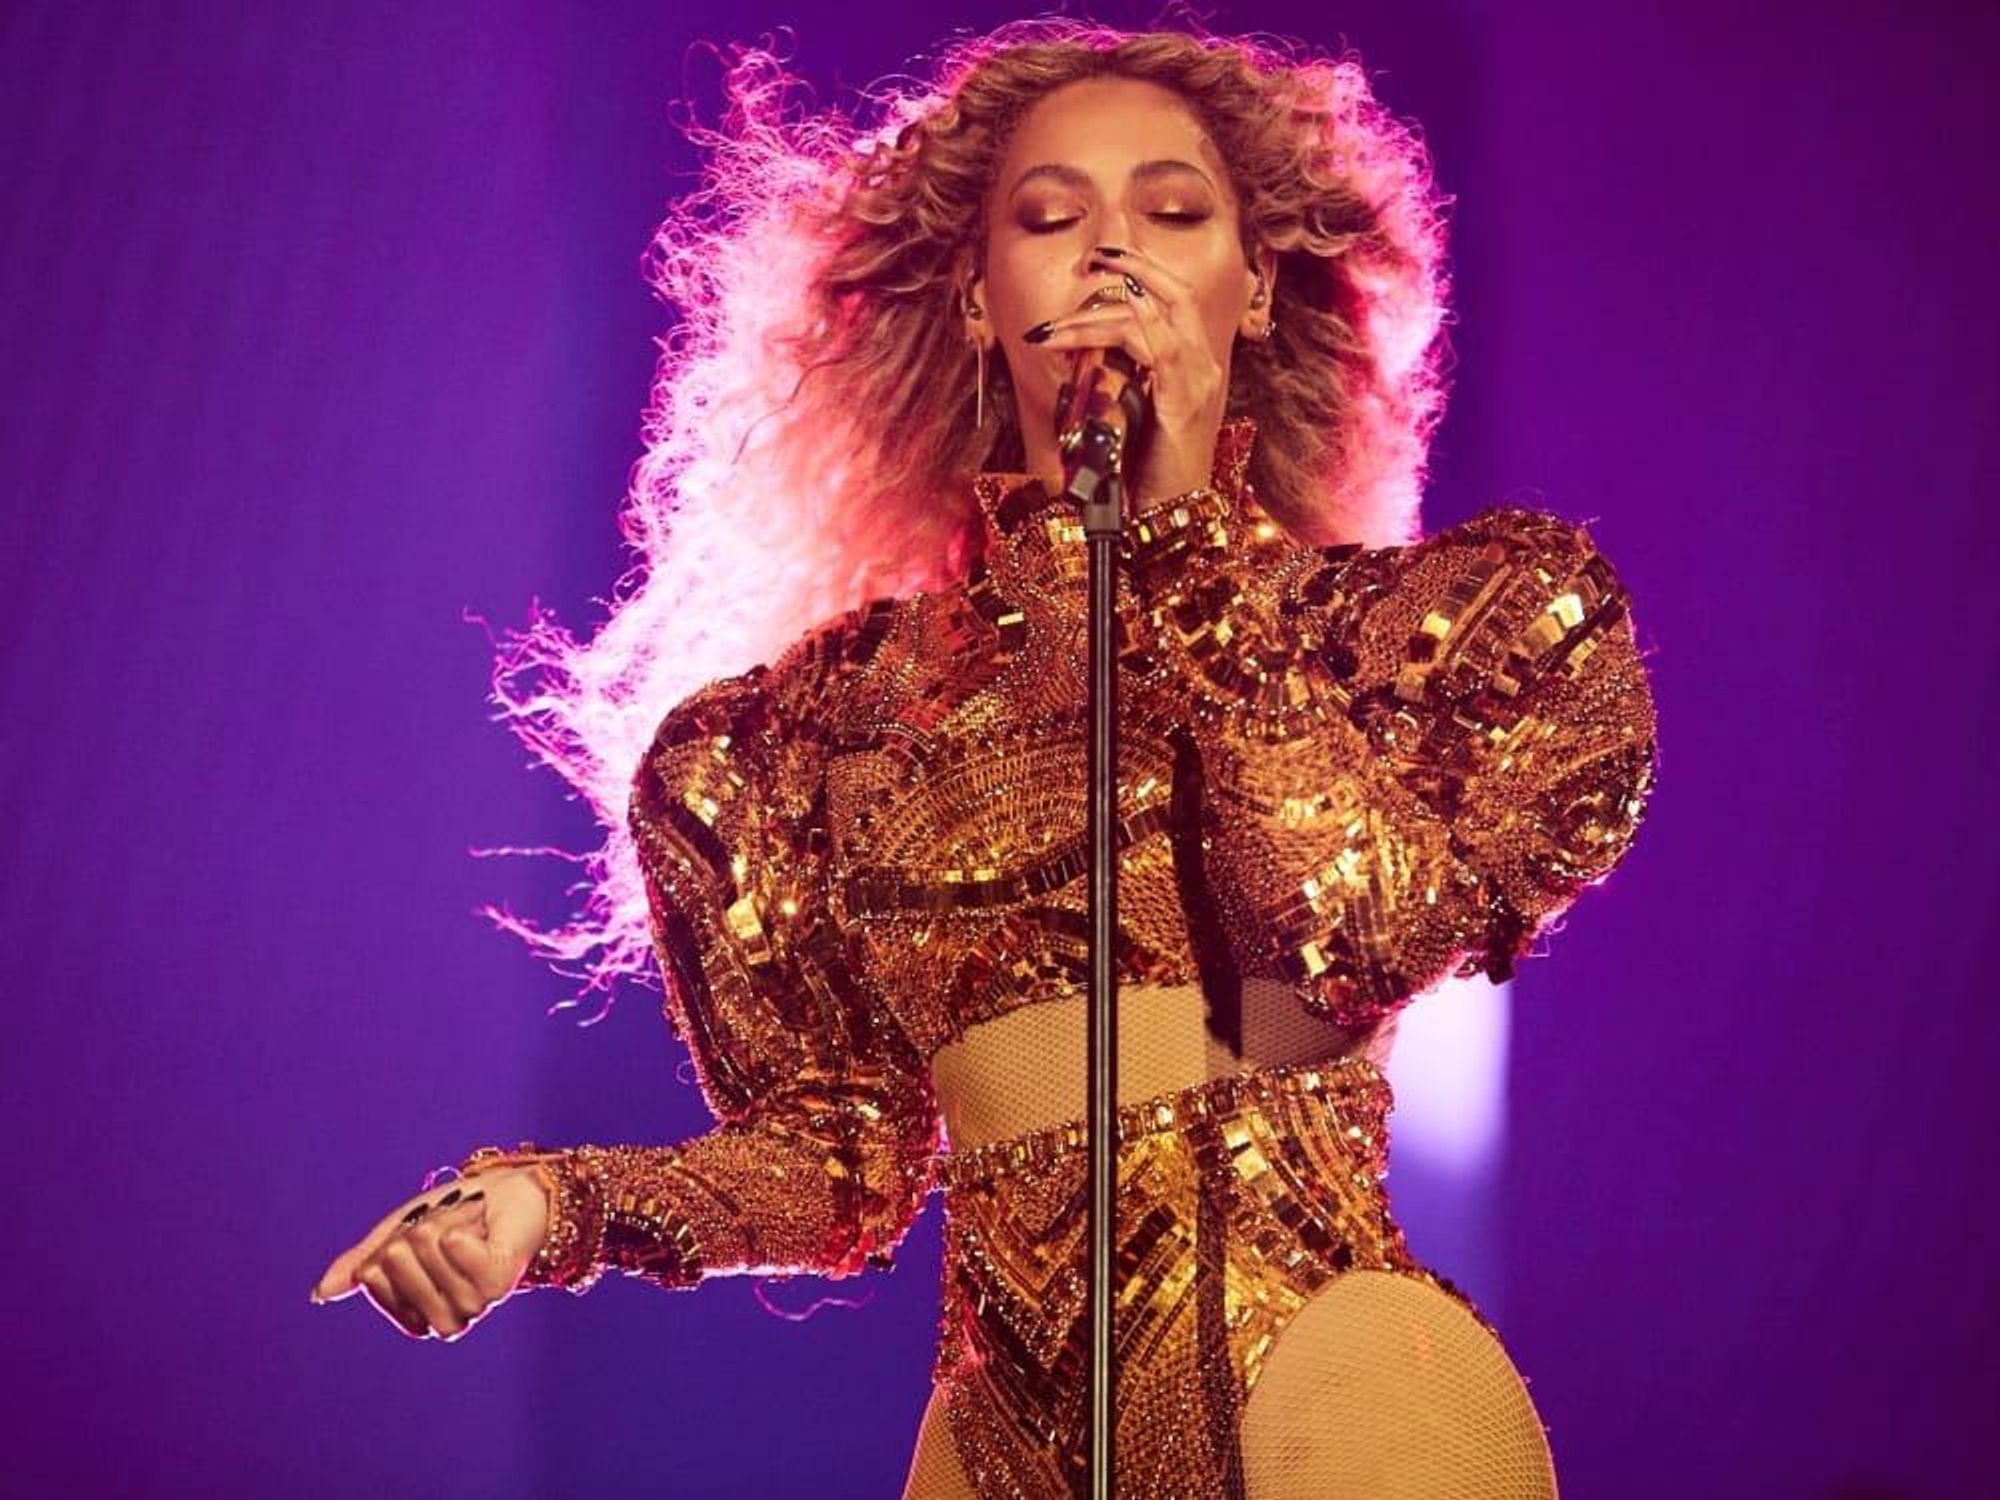 Beyonce in Givenchy Haute Couture sequined bodysuit at Houston concert